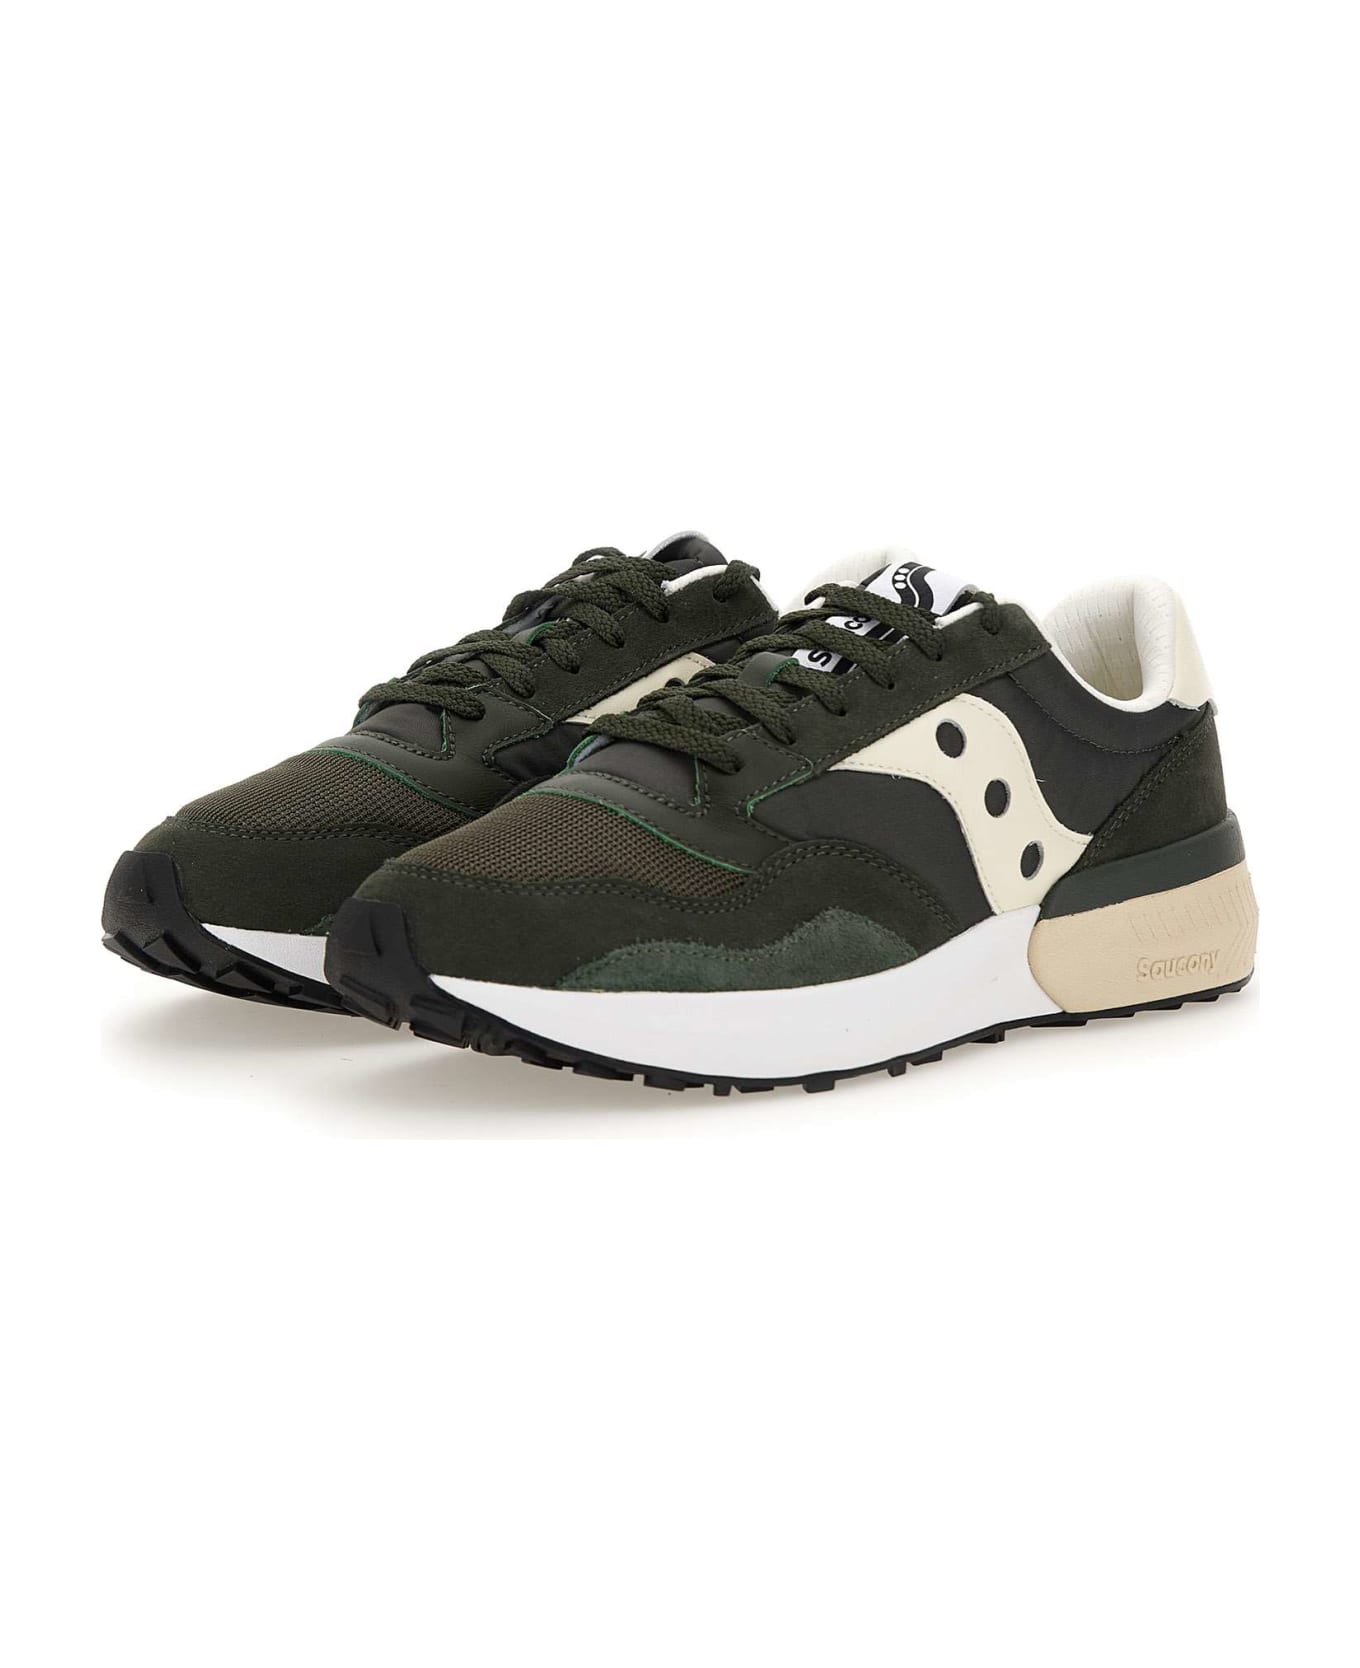 Saucony "jazz Nxt" Sneakers Leather And Fabric - GREEN